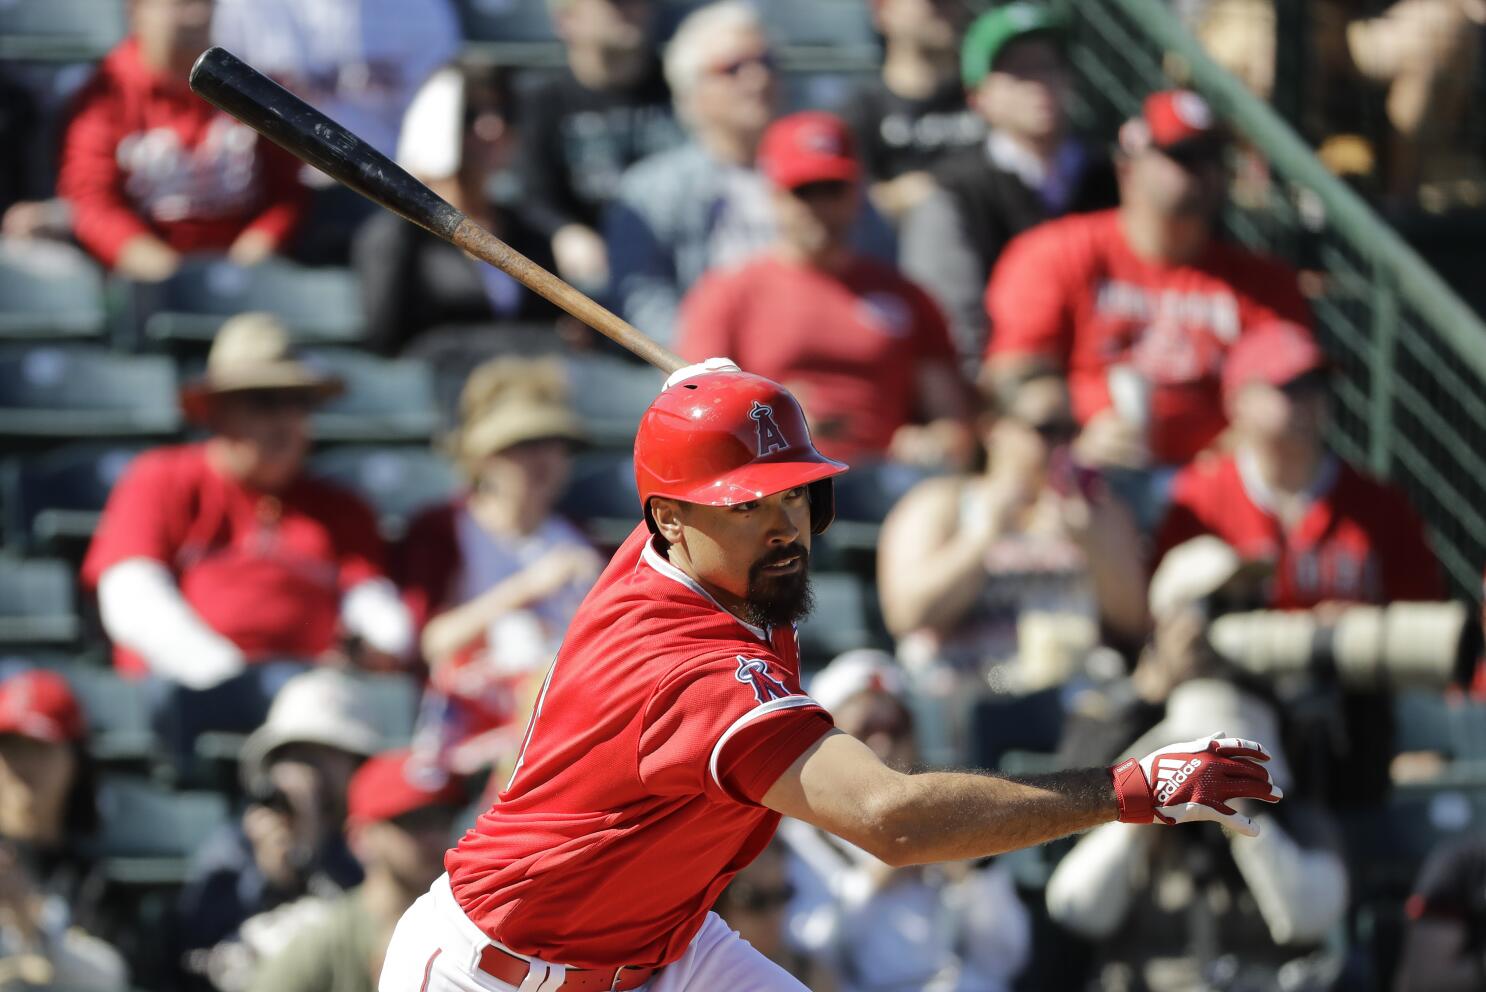 Angels newcomer Rendon goes 2 for 2 in spring debut - The San